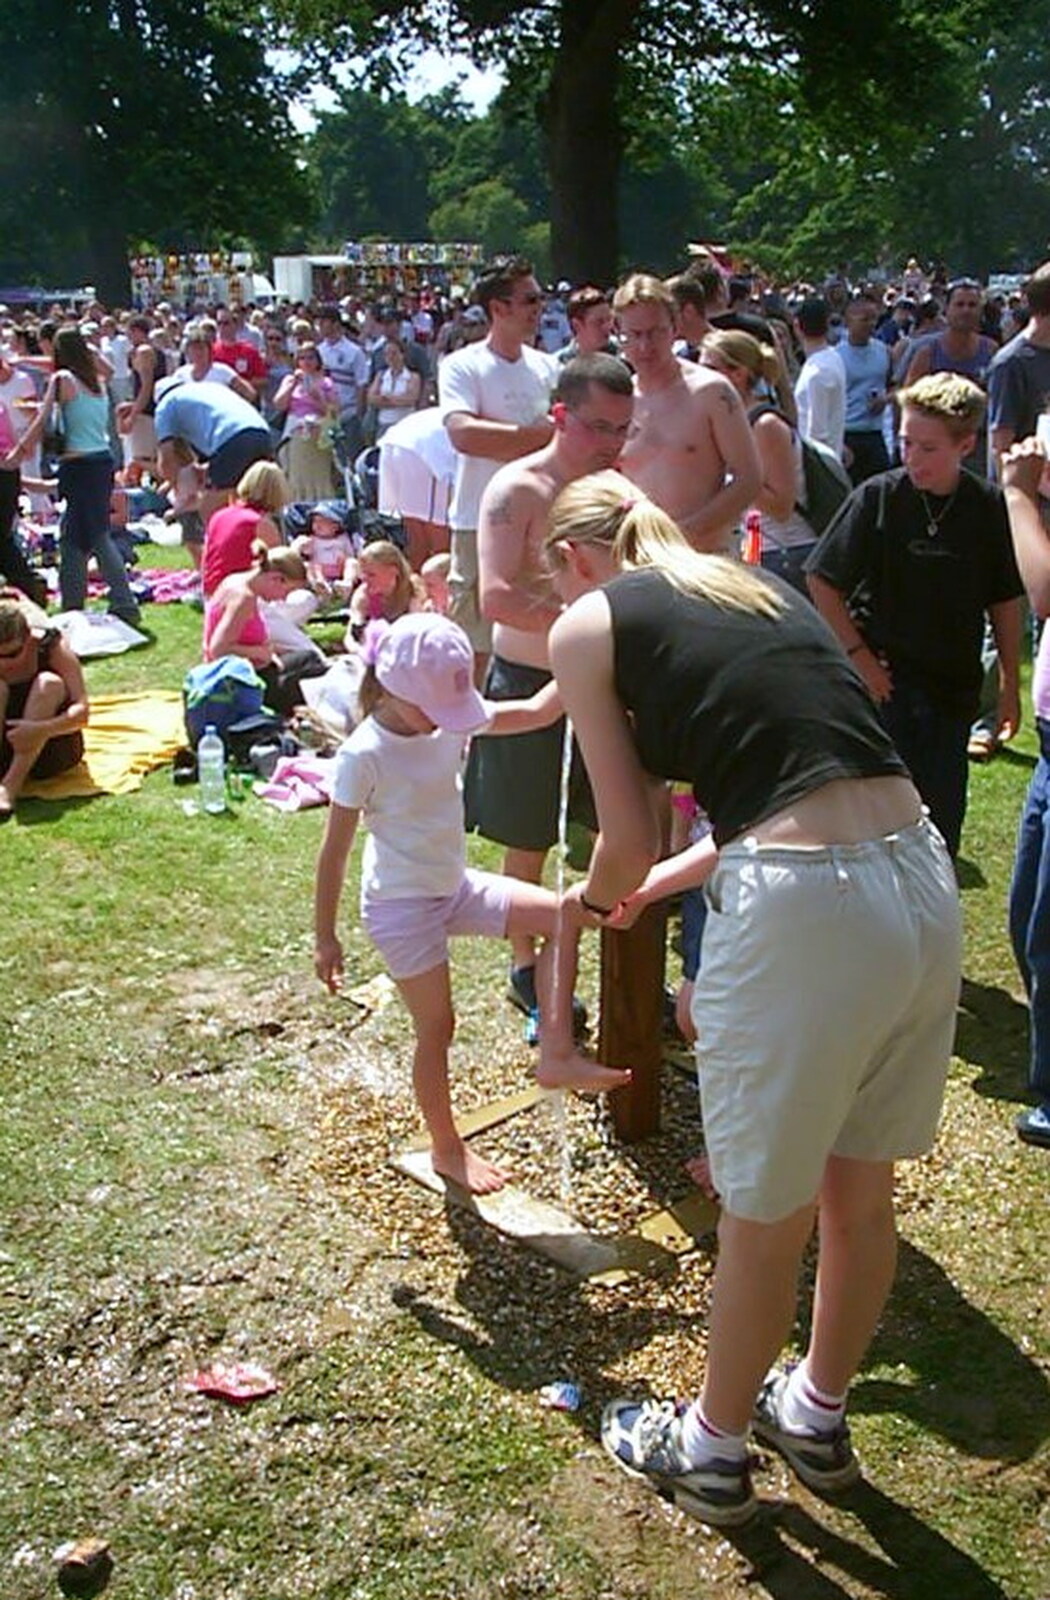 A girl gets her foot washed from Radio 1's One Big Sunday, Chantry Park, Ipswich - 14th July 2002